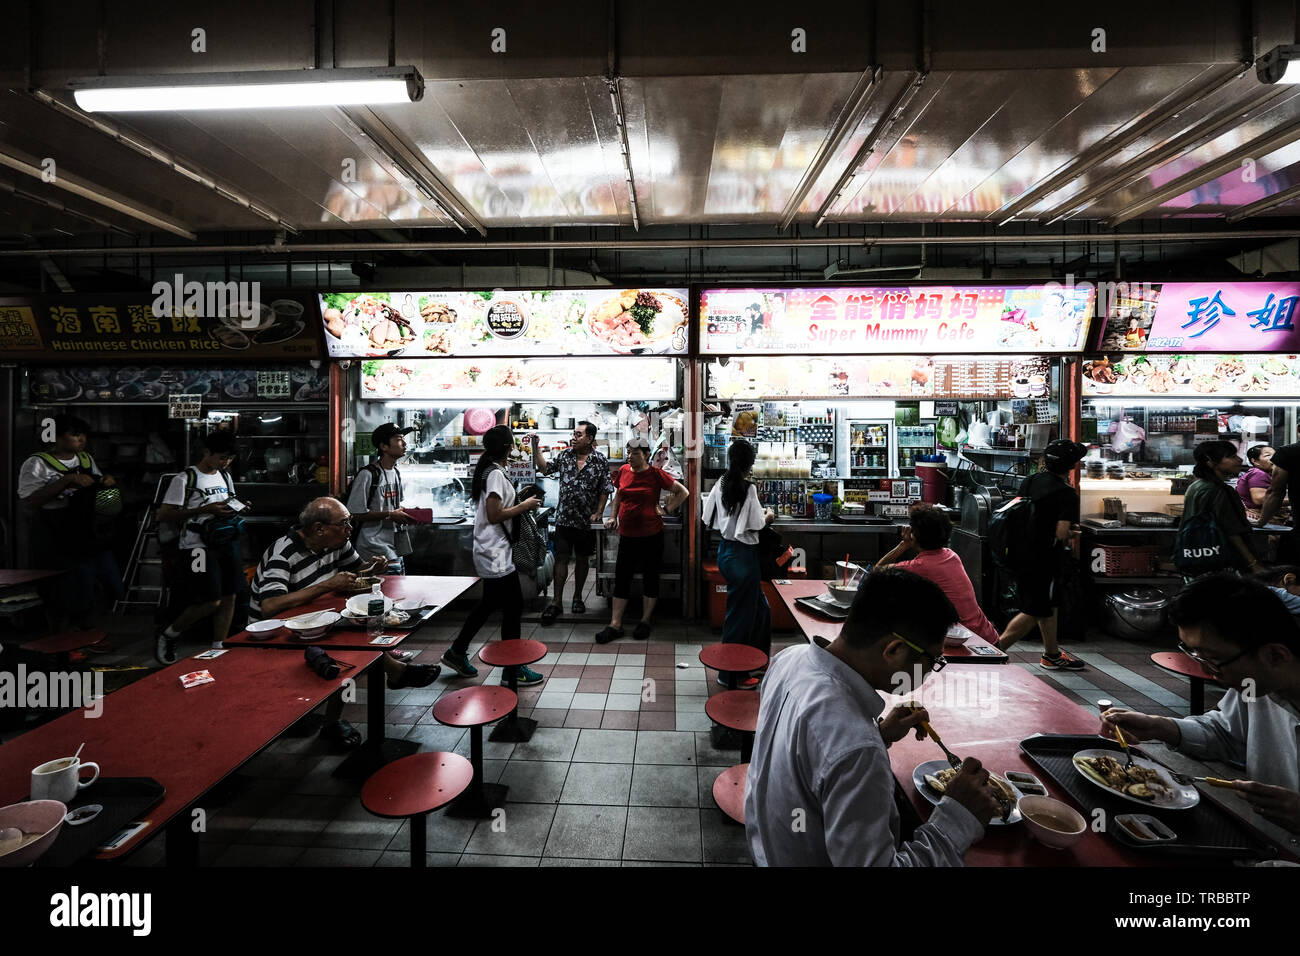 Locals Eating at Hawker Centre, Singapore Stock Photo